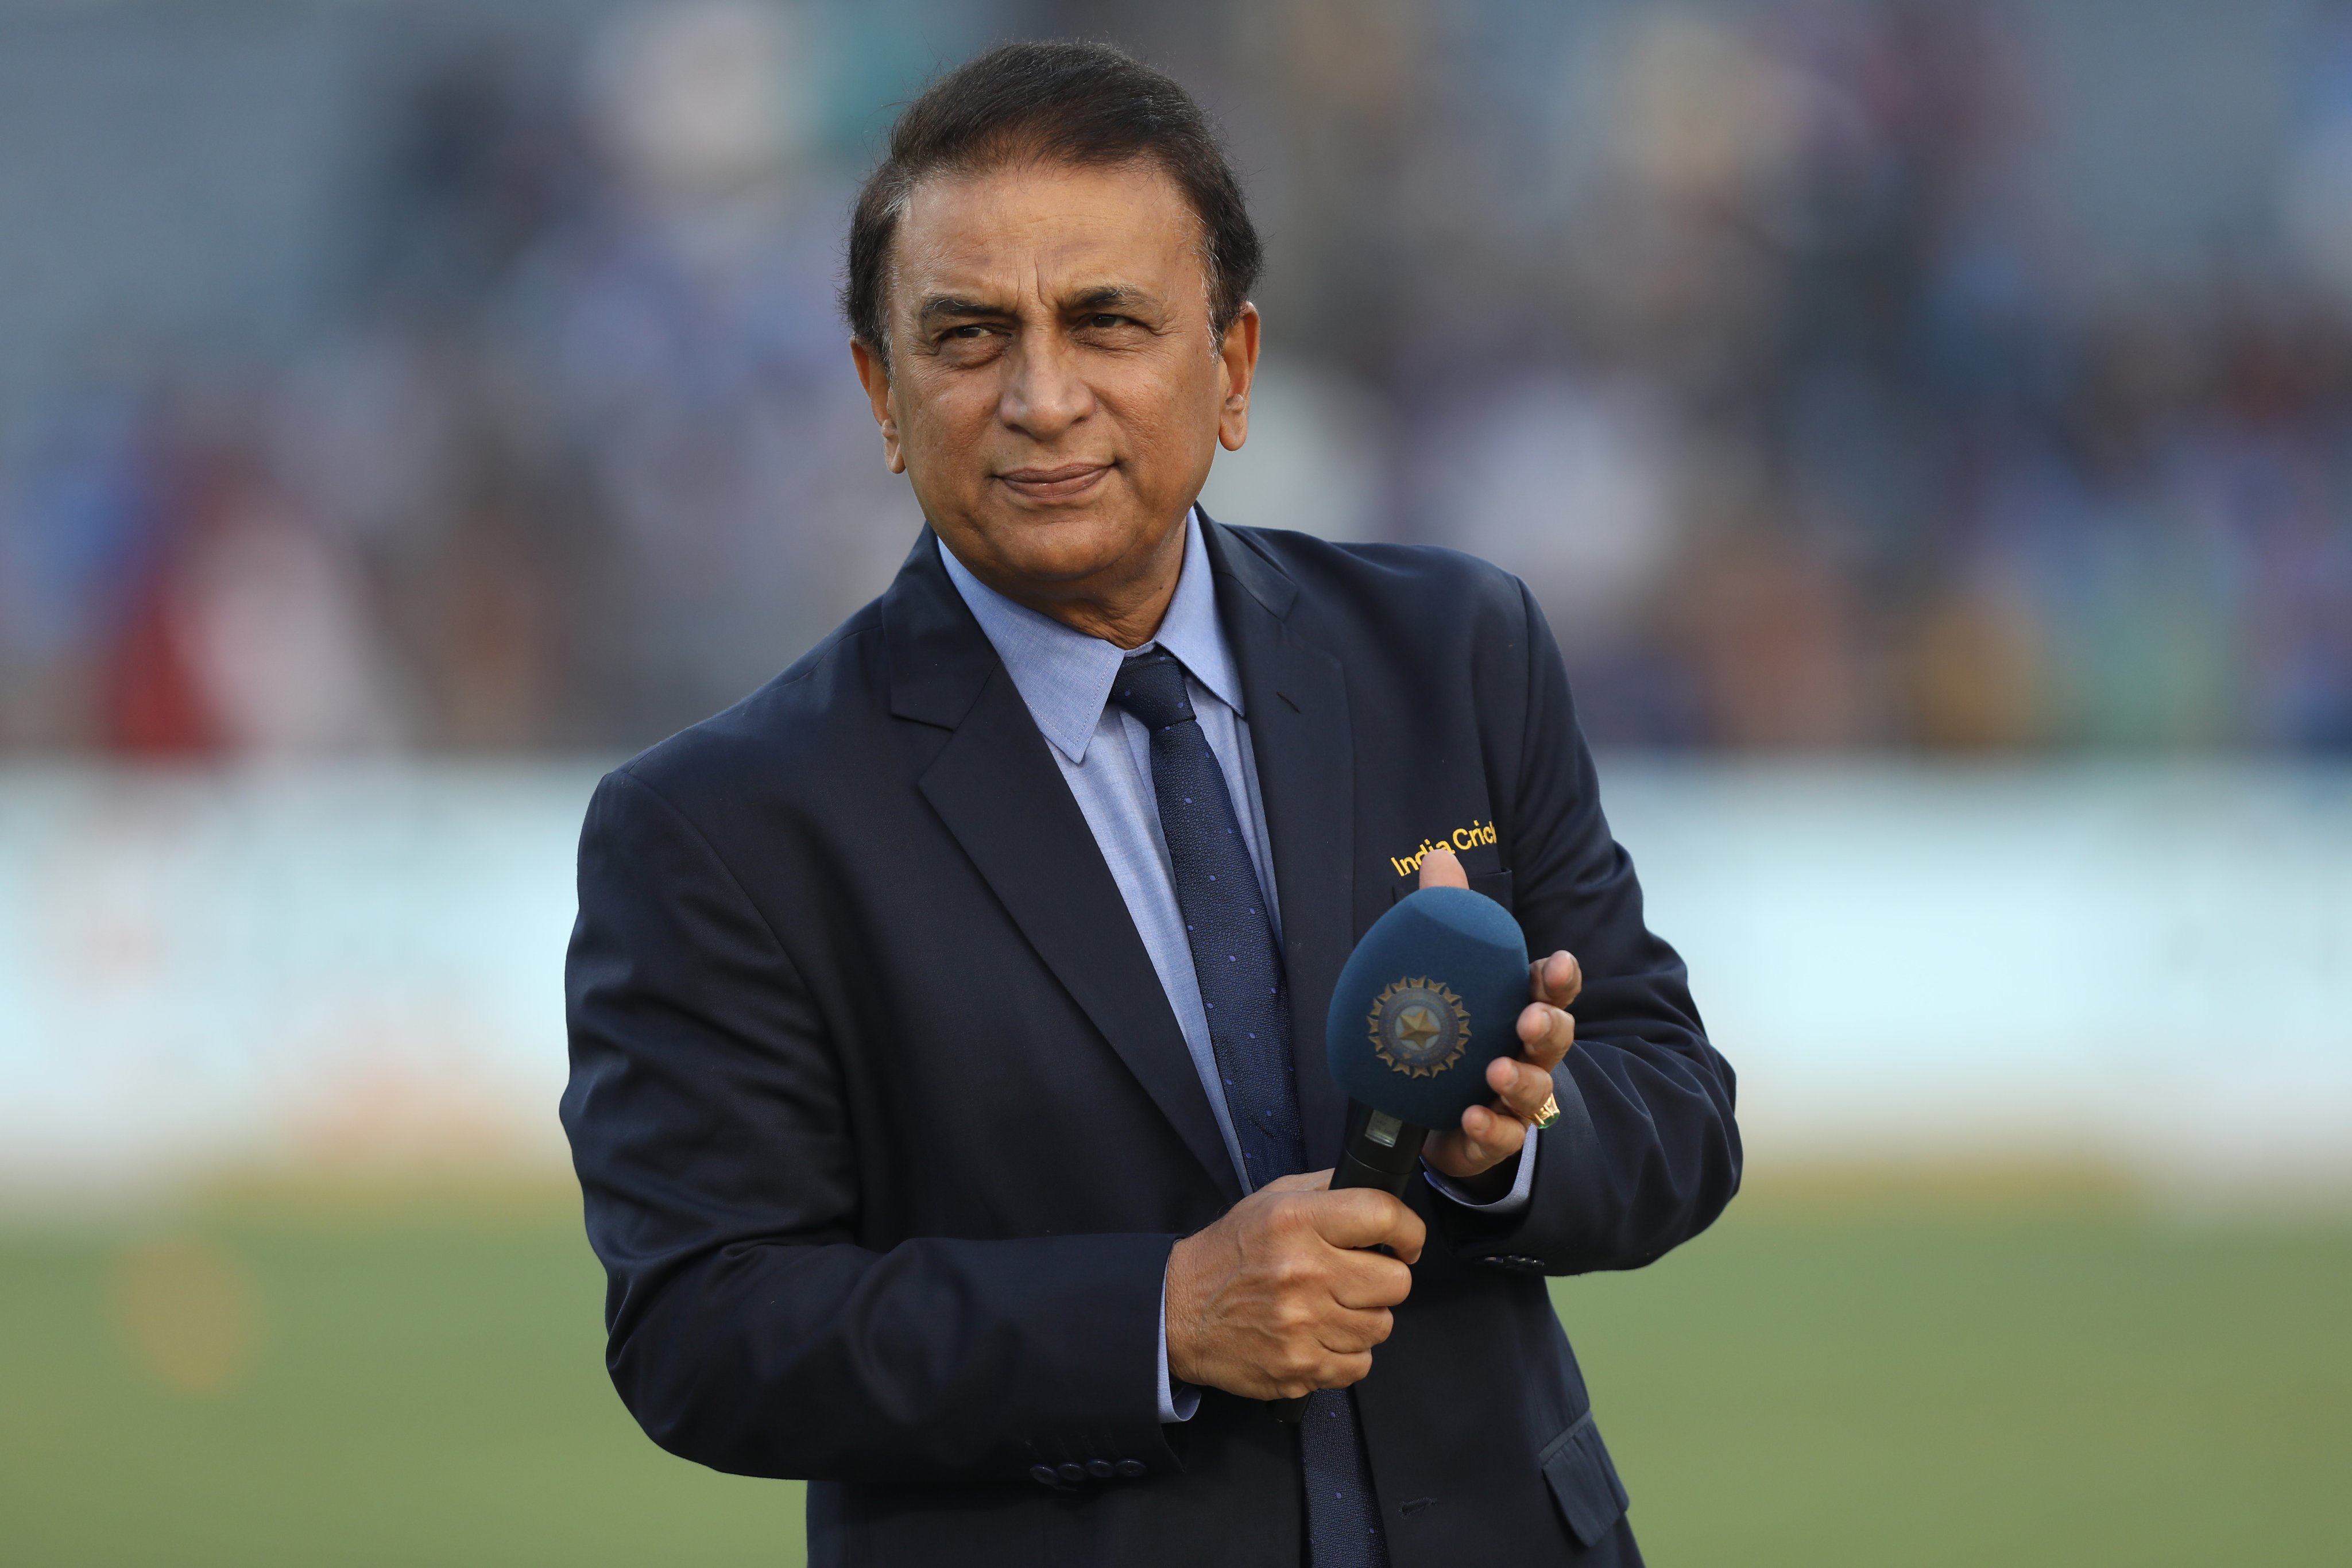 Ganguly should be asked why there is such discrepancy, says Gavaskar after Kohli’s captaincy comments